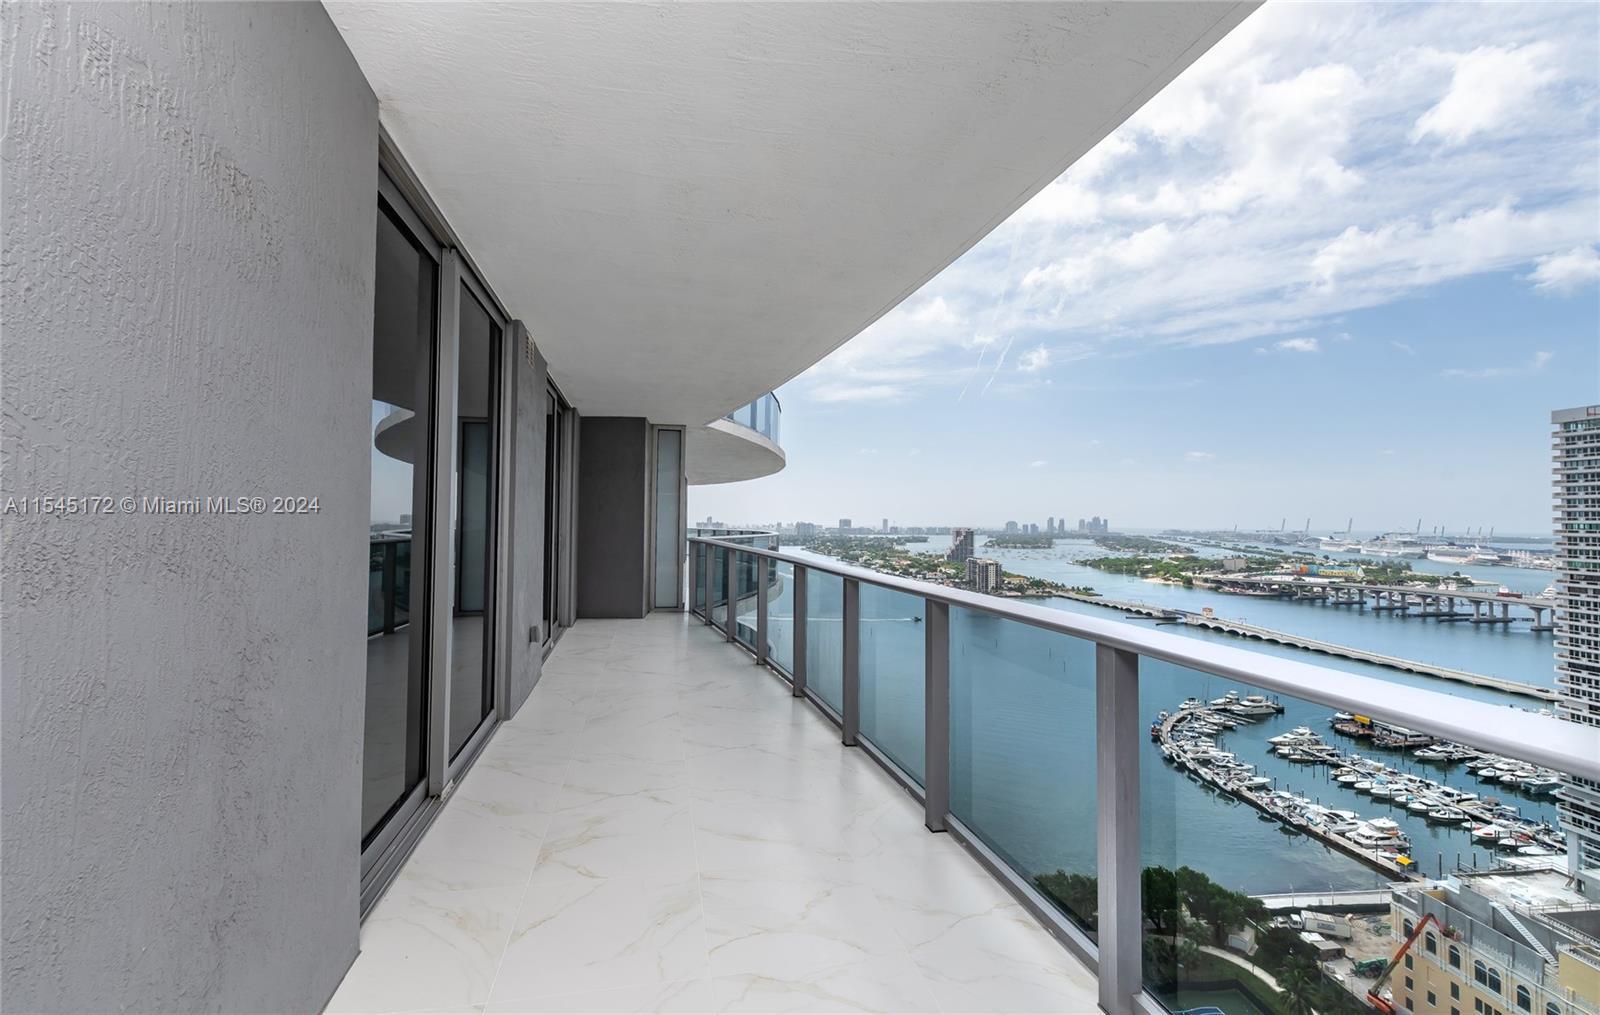 BRIGHT AND SUPER SPACIOUS 3 BED, 3 and 1/2 BATHS UNIT WITH BREATHTAKING VIEWS TO BISCAYNE BAY AT LUX